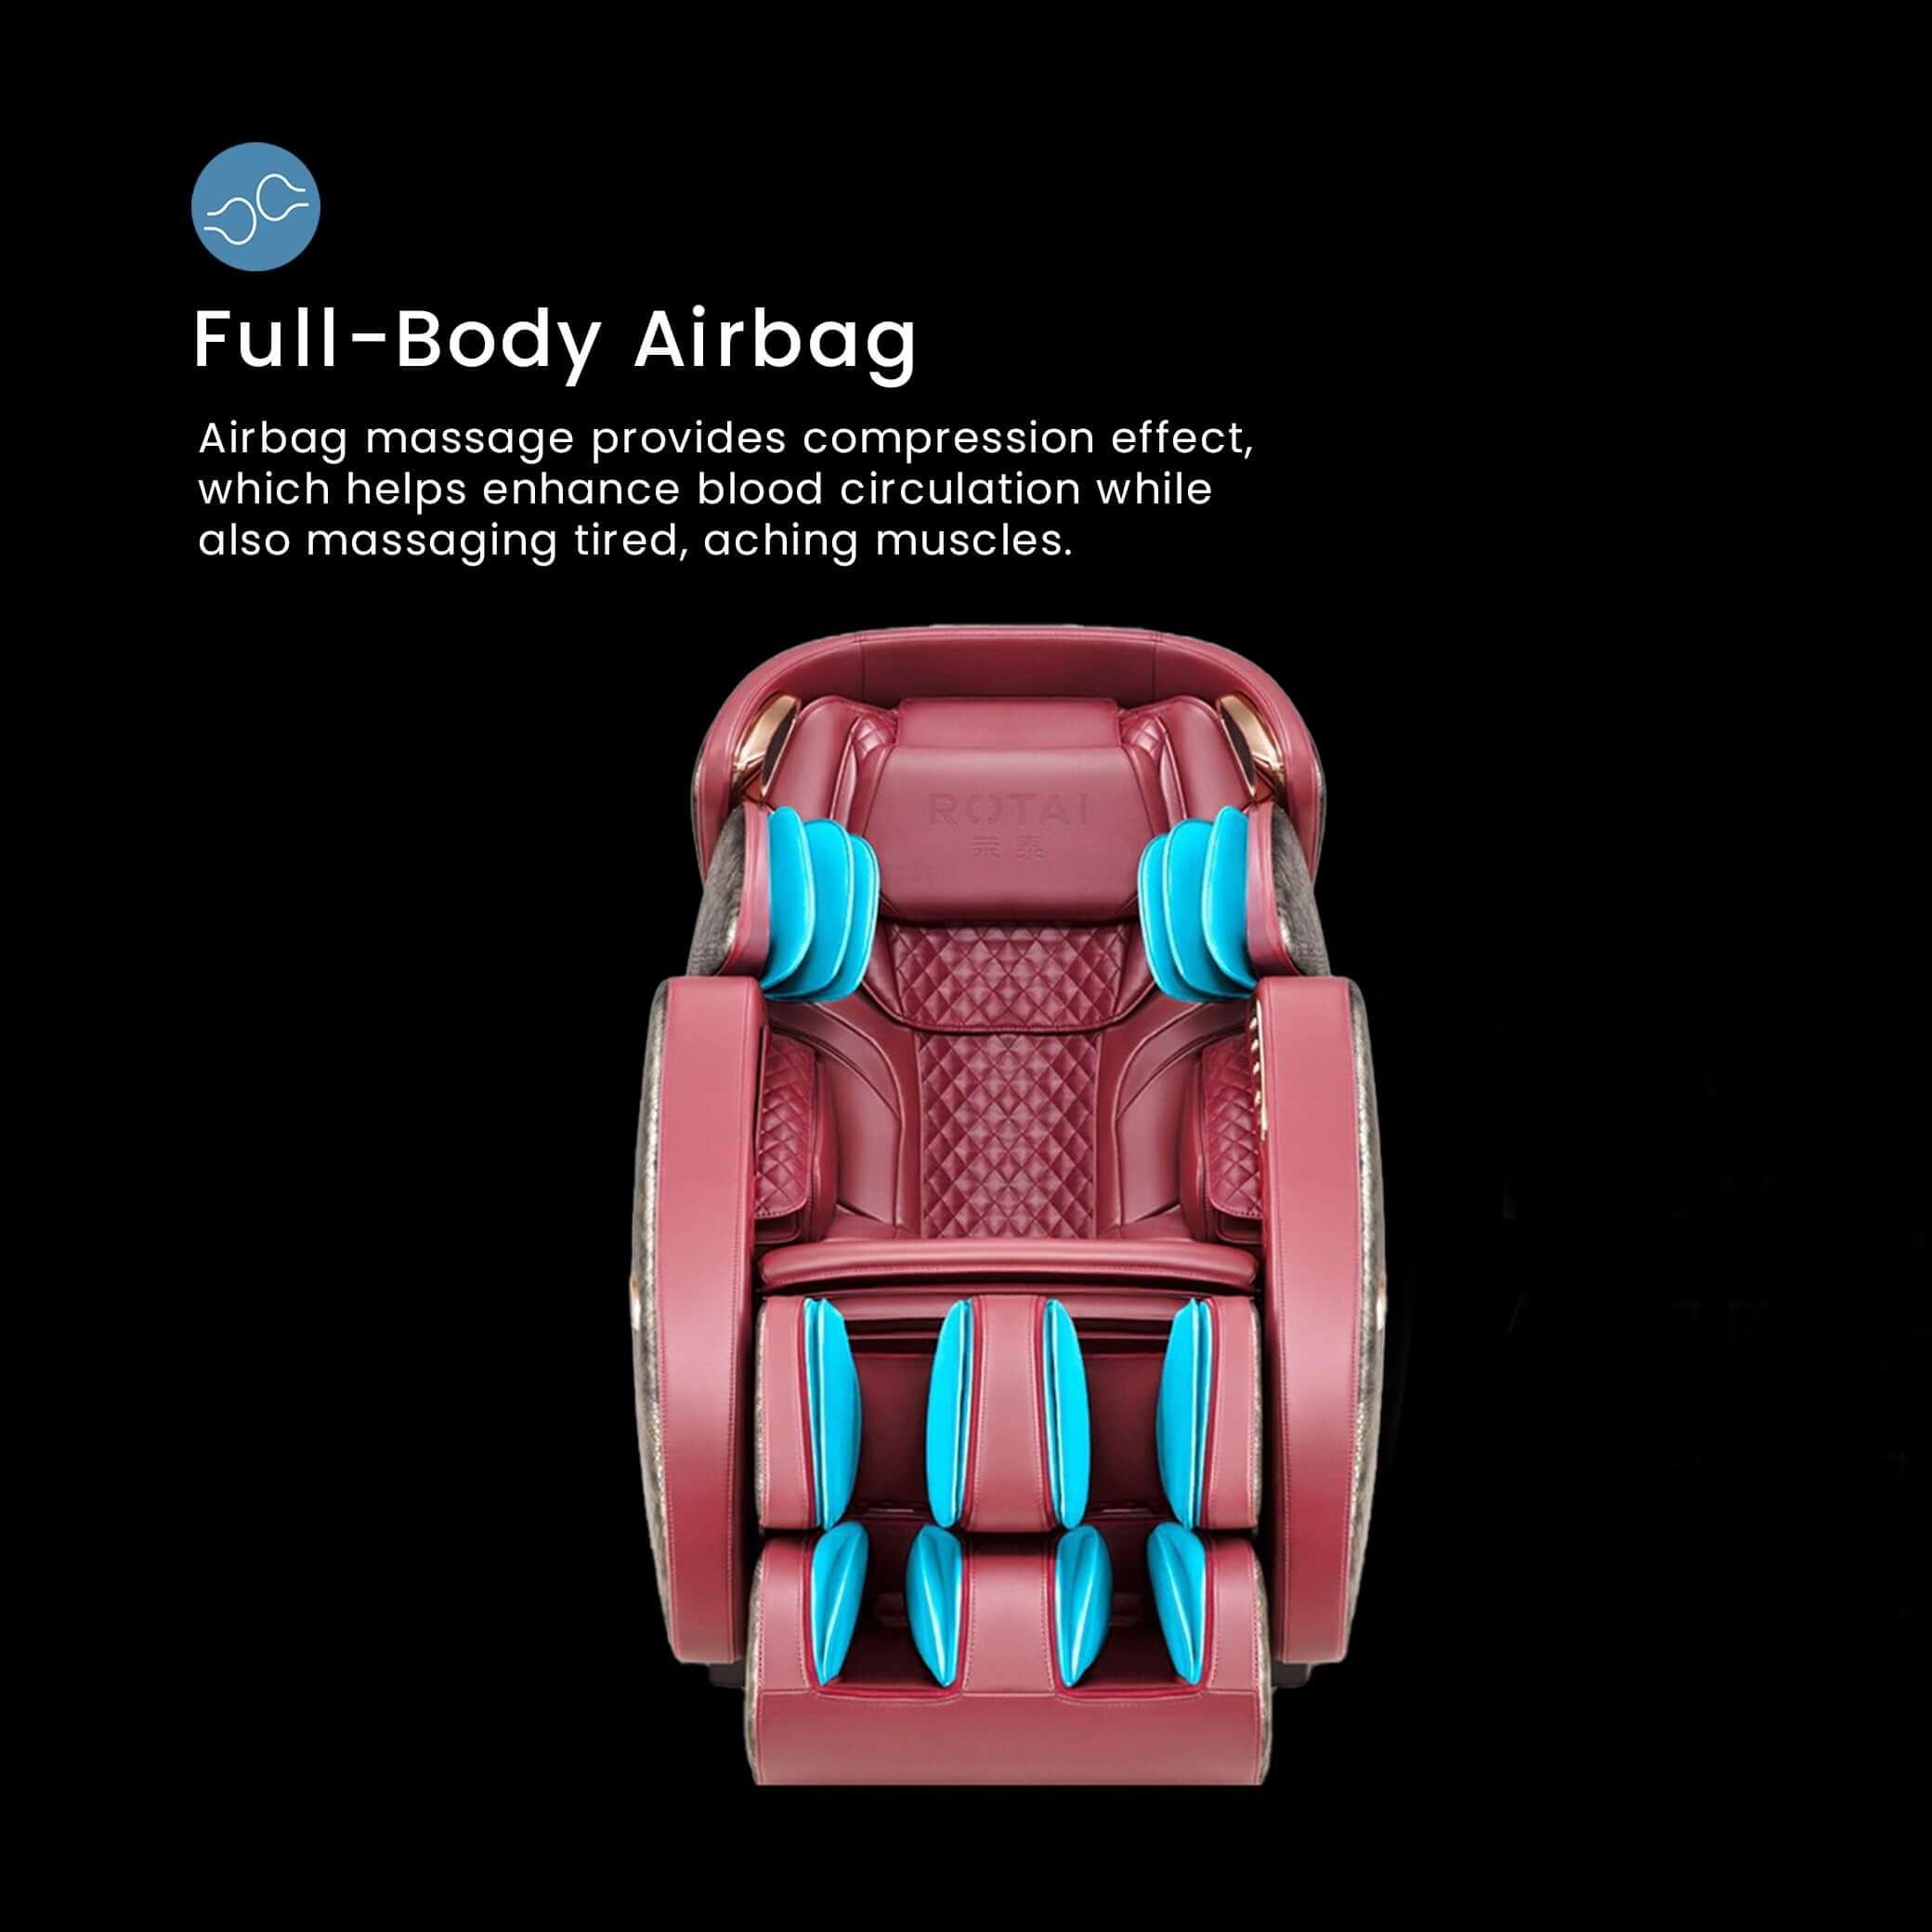 Best Massage Chair in UAE with full-body airbag technology for enhanced blood circulation and muscle relief - كرسي مساج كهربائي, best massage chair uae, massage chair Dubai, massage chair uae, massage chair Saudi Arabia, كرسي التدليك, Best massage chair i